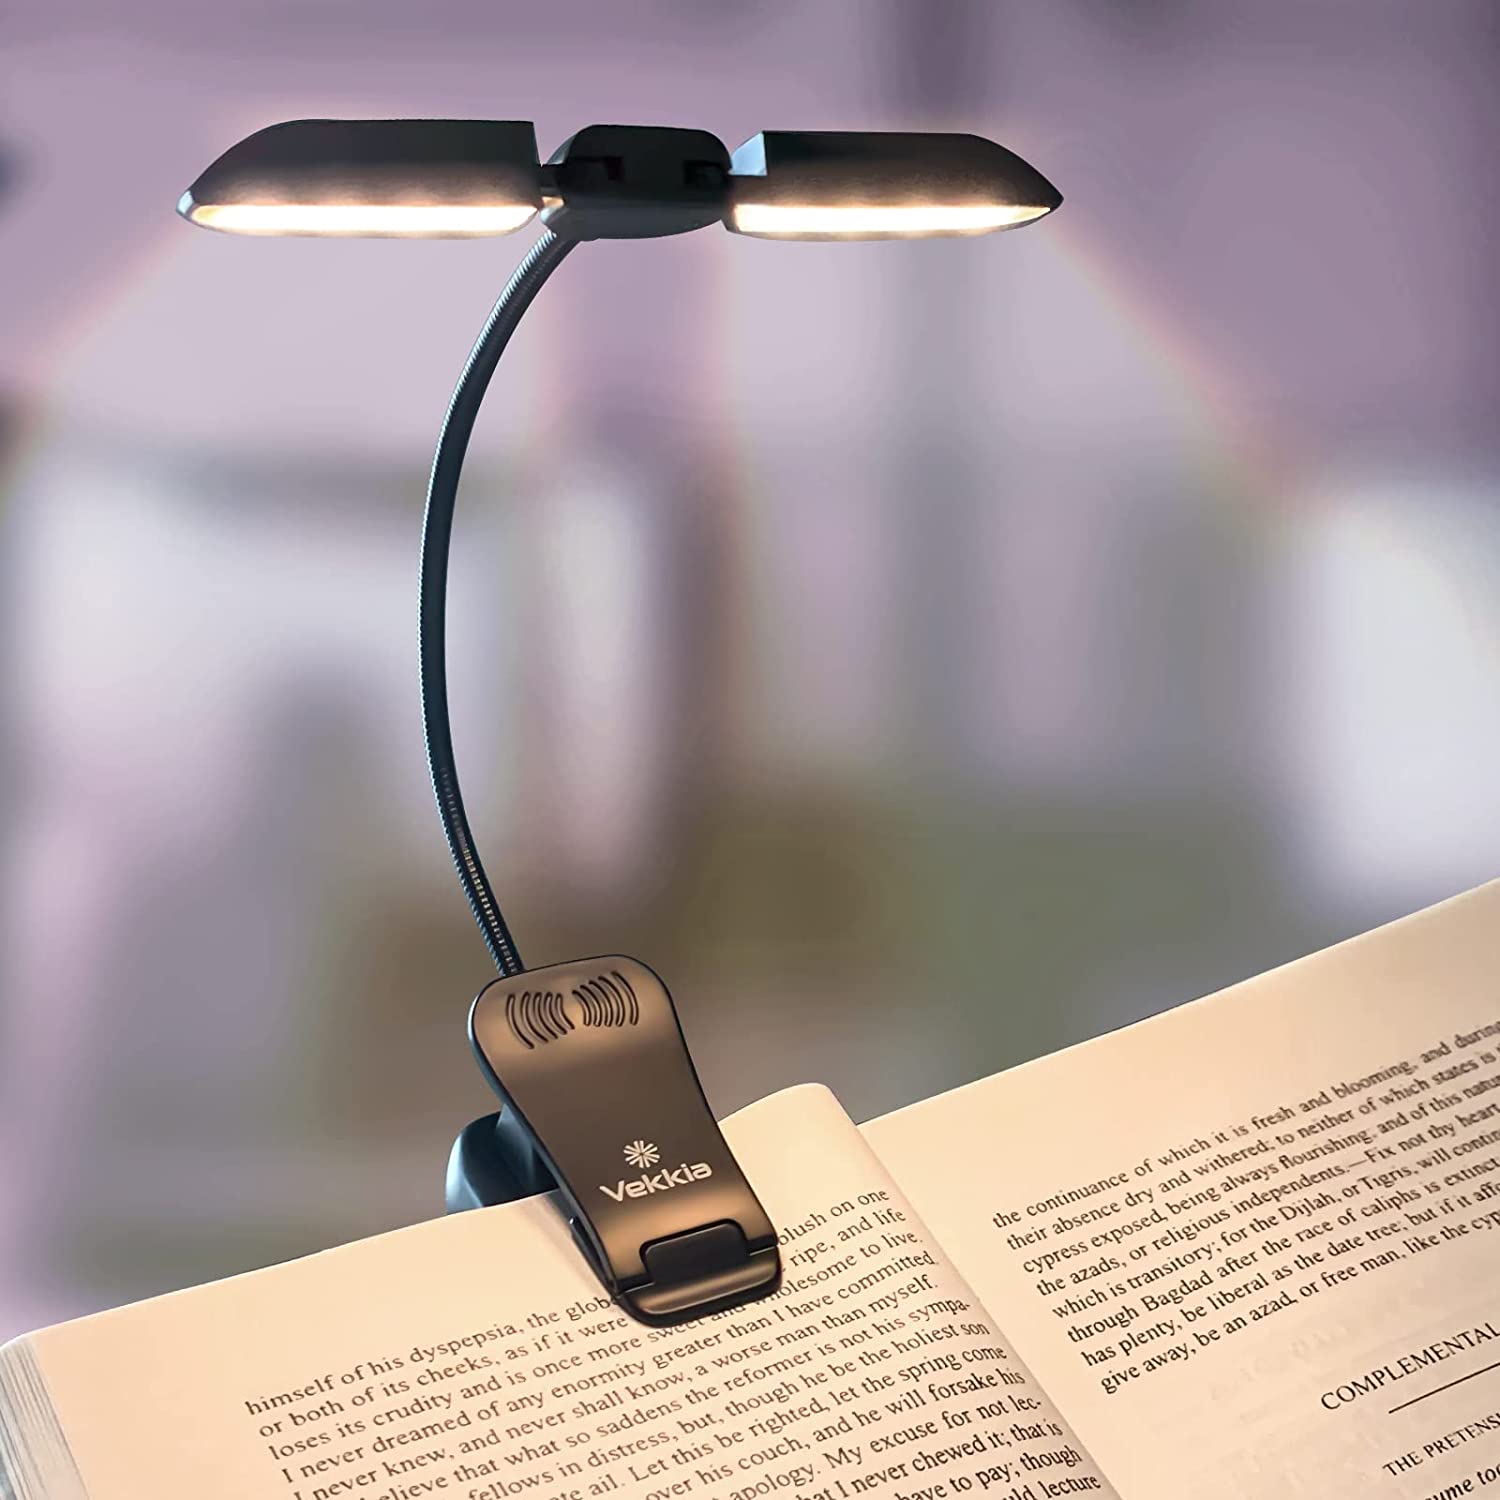 Ingzy LED Vision Book Light for Reading in Bed at Night Eye Care Reading Light Student Reading Light Bright Night 